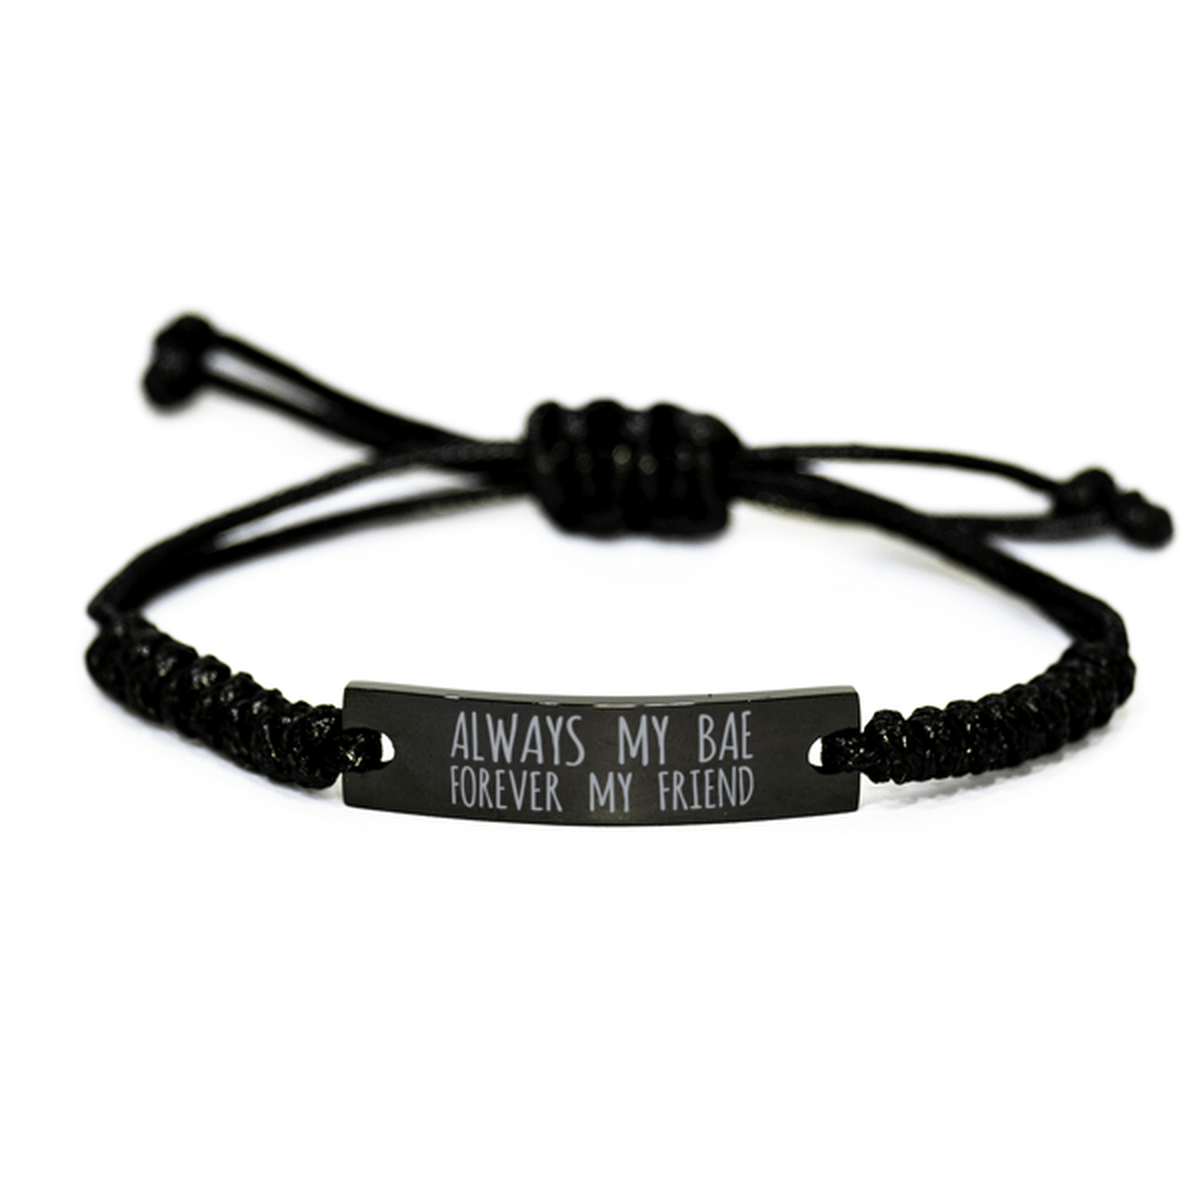 Inspirational Bae Black Rope Bracelet, Always My Bae Forever My Friend, Best Birthday Gifts For Family